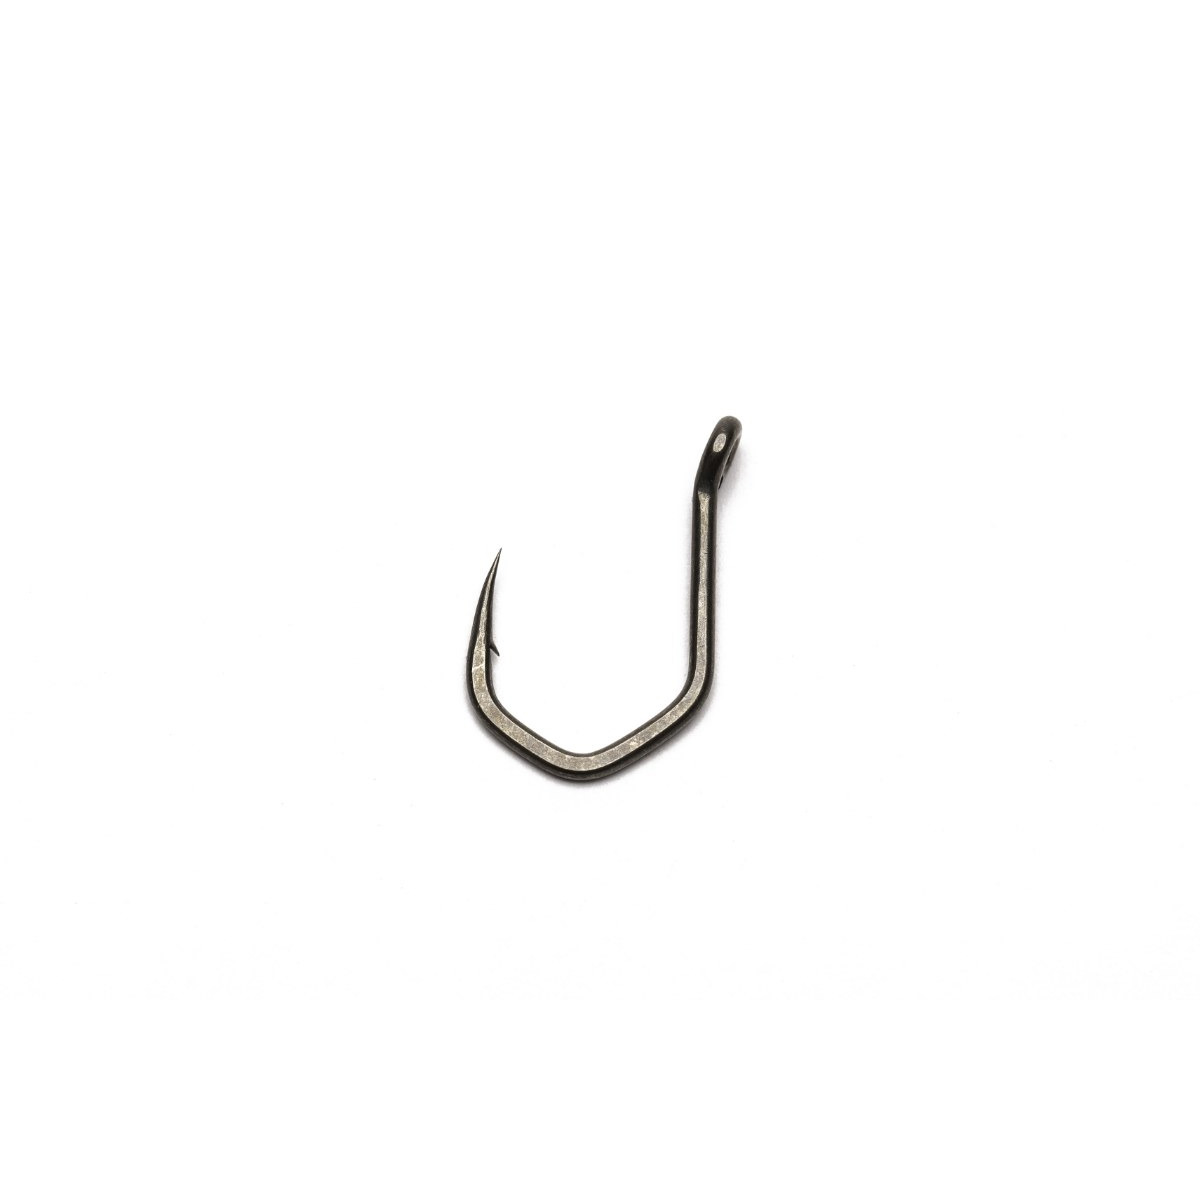 Nash Chod Claw - Size 4 Micro Barbed